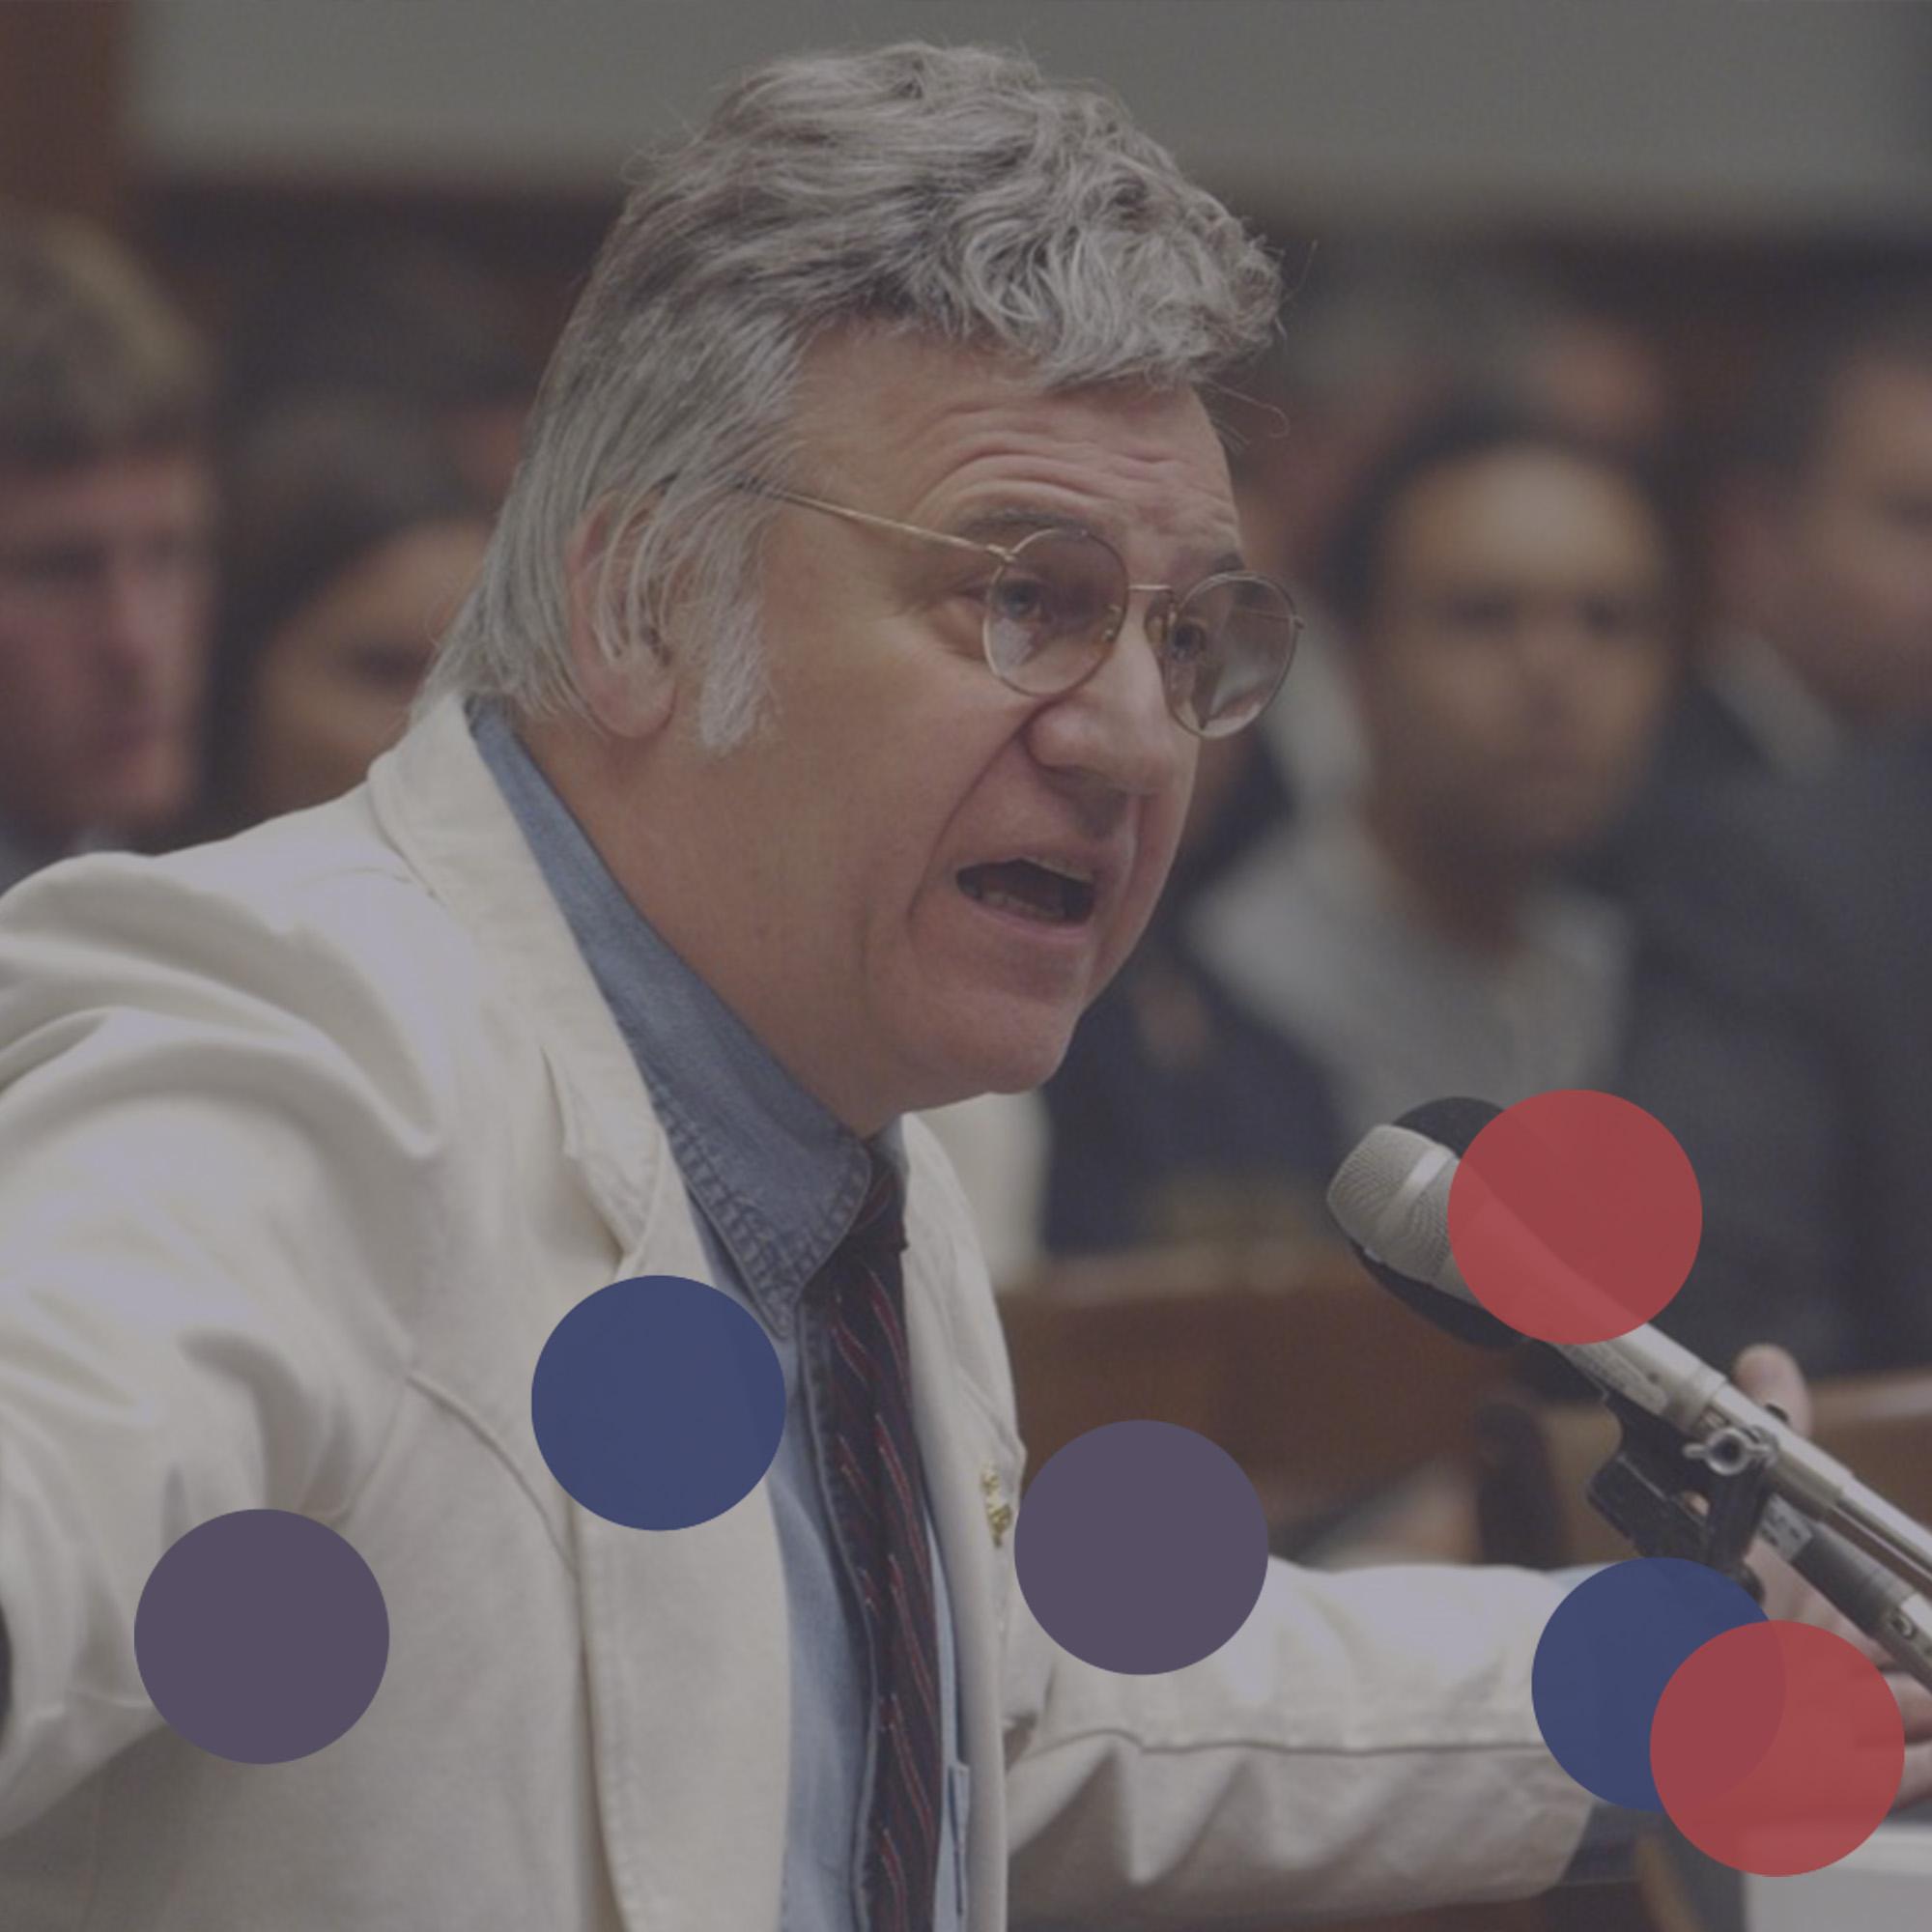 Thumbnail for "Jim Traficant Heads To Jail, Toupee And All (2002)".